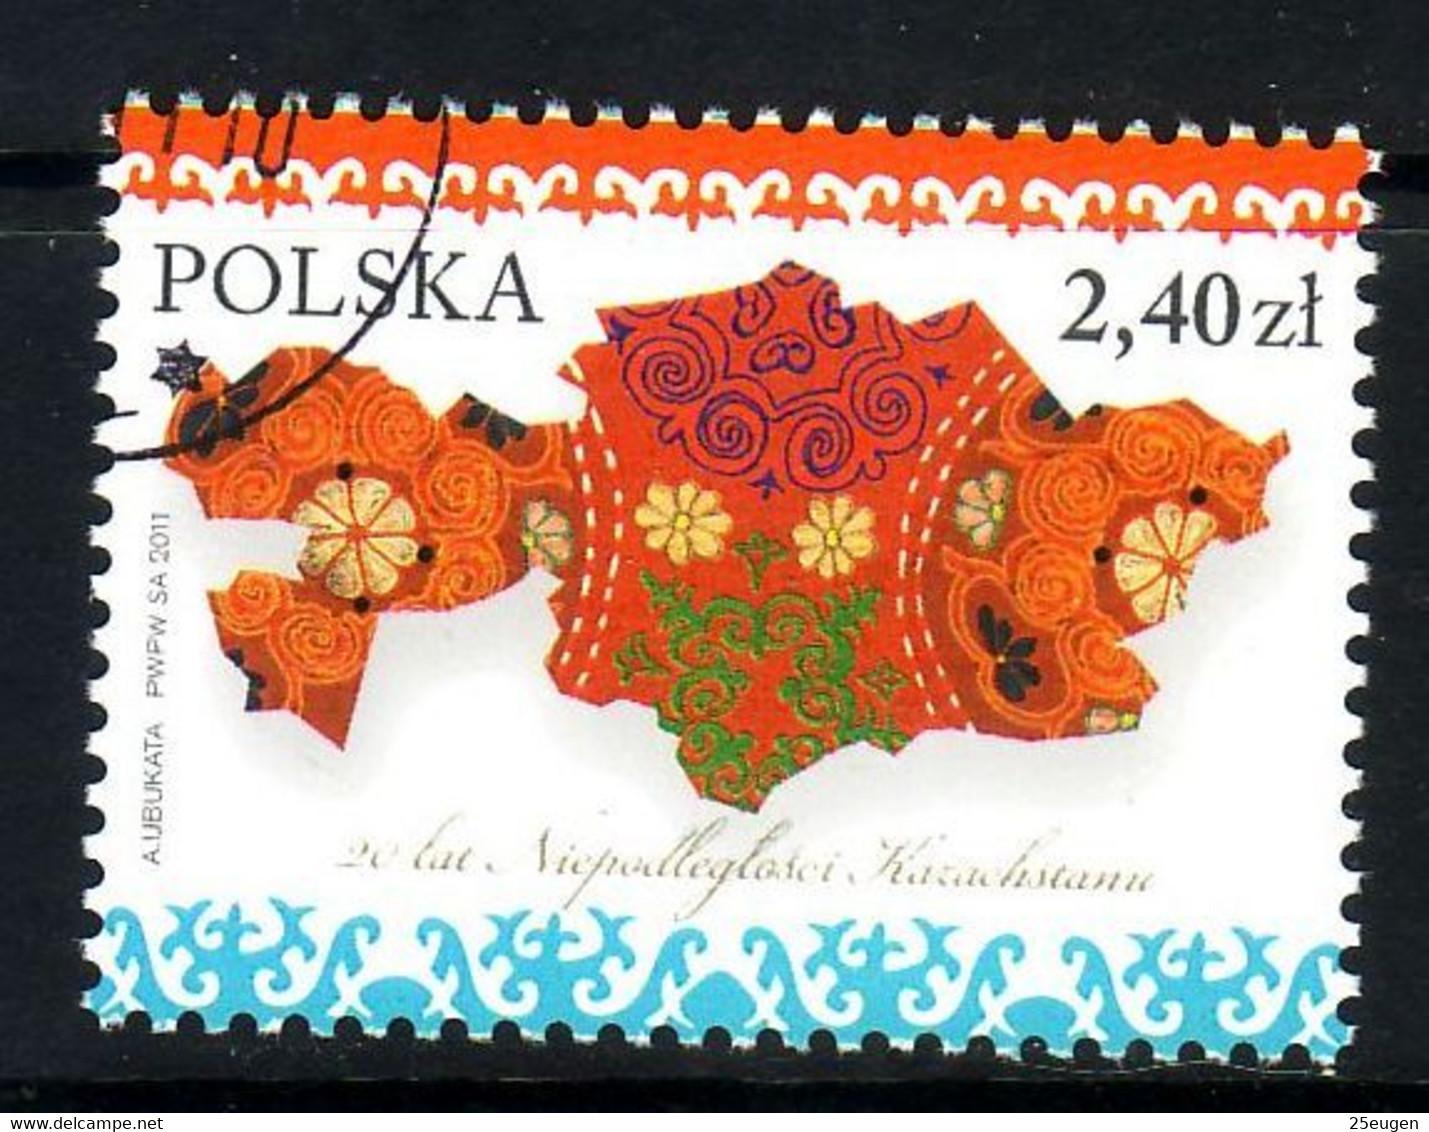 POLAND 2011 Michel No 4545 Used - Used Stamps